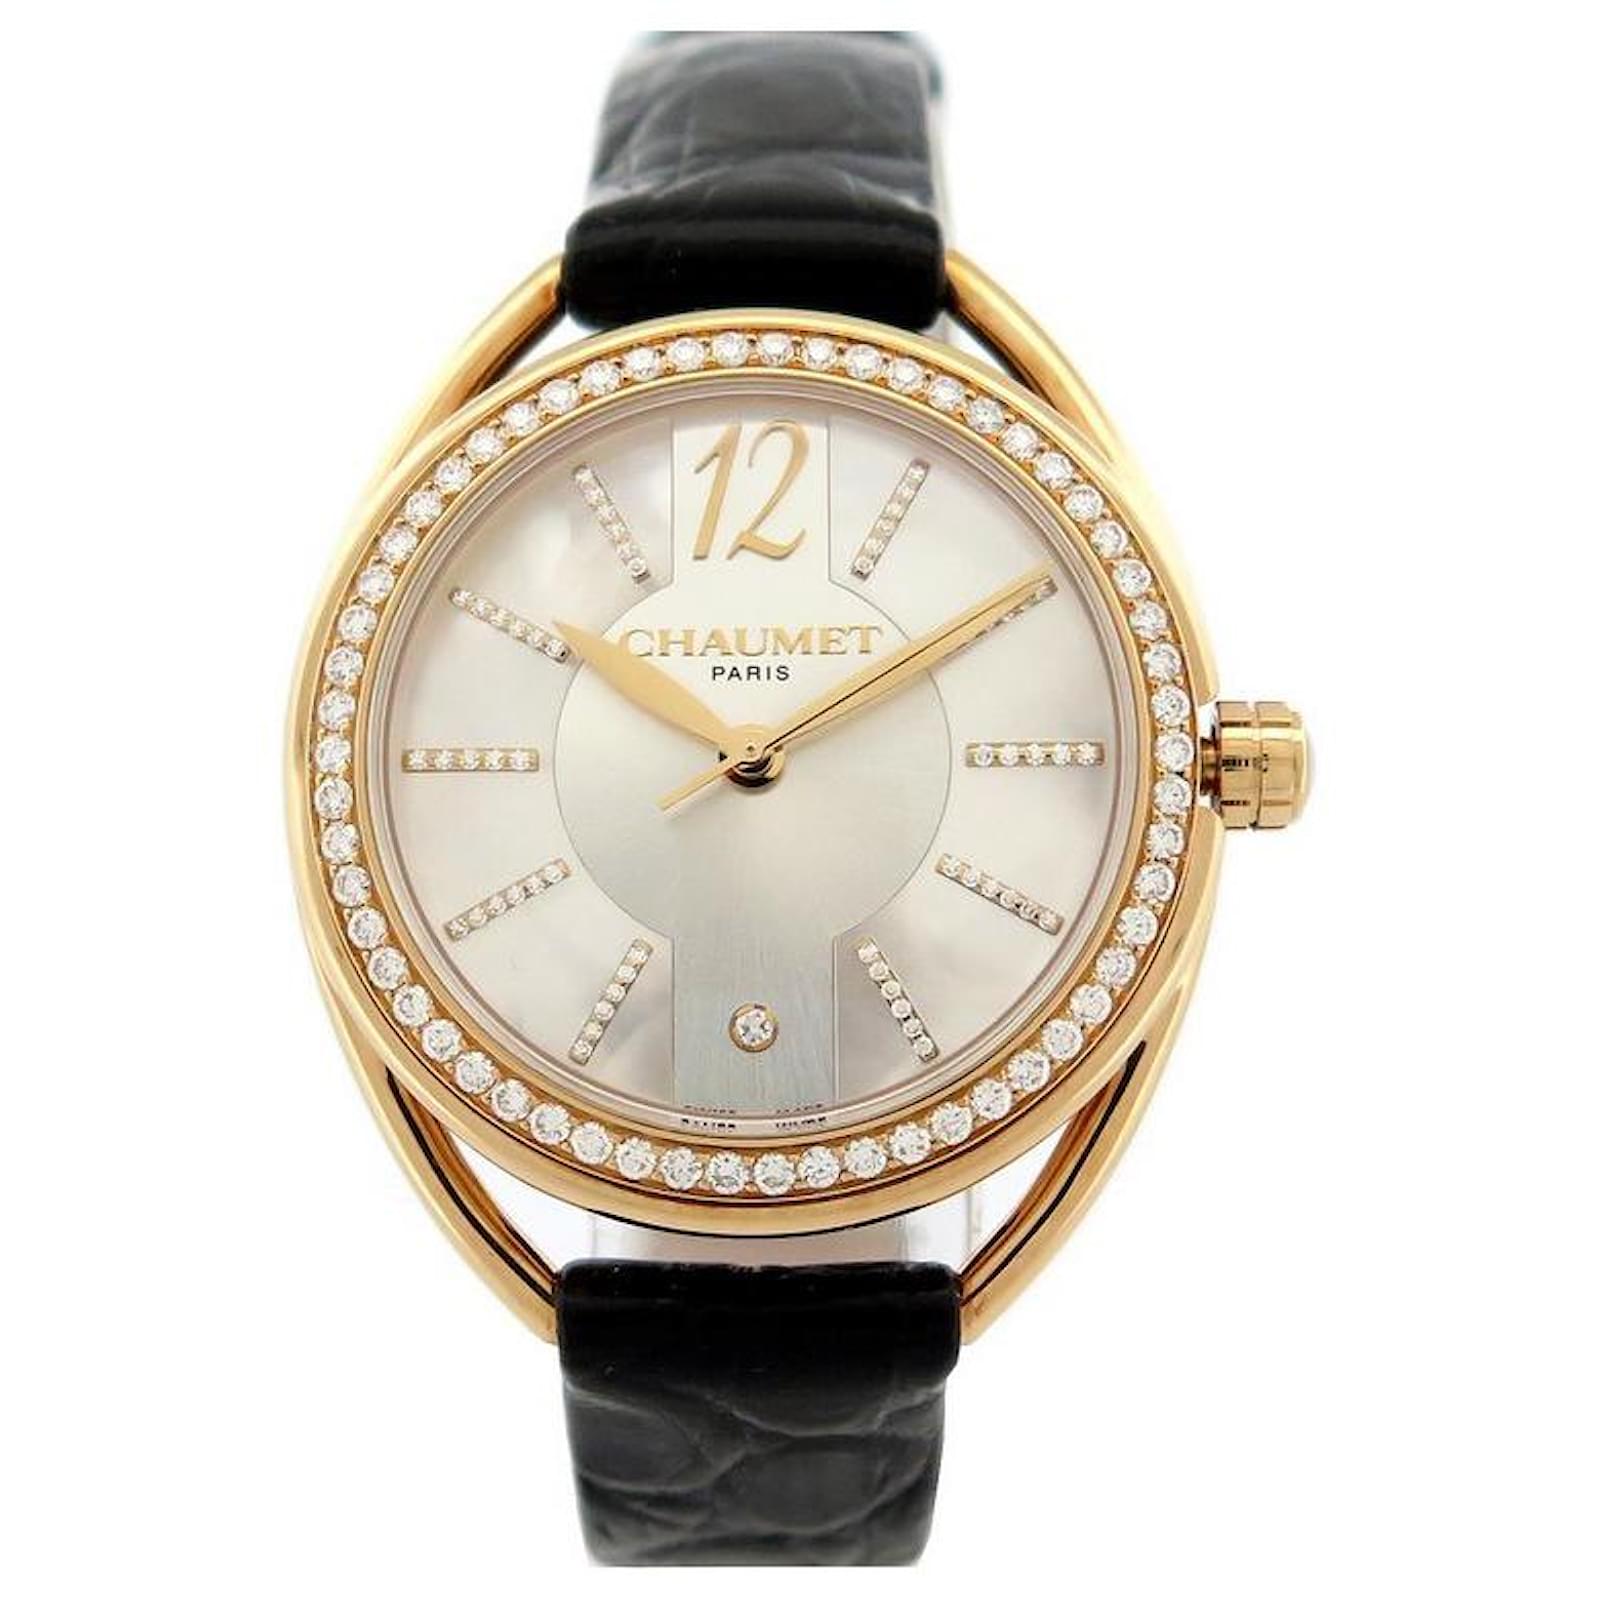 NEW CHAUMET WATCH LINKS LIGHT W23012 ct gold 18K MOTHER OF PEARL ...